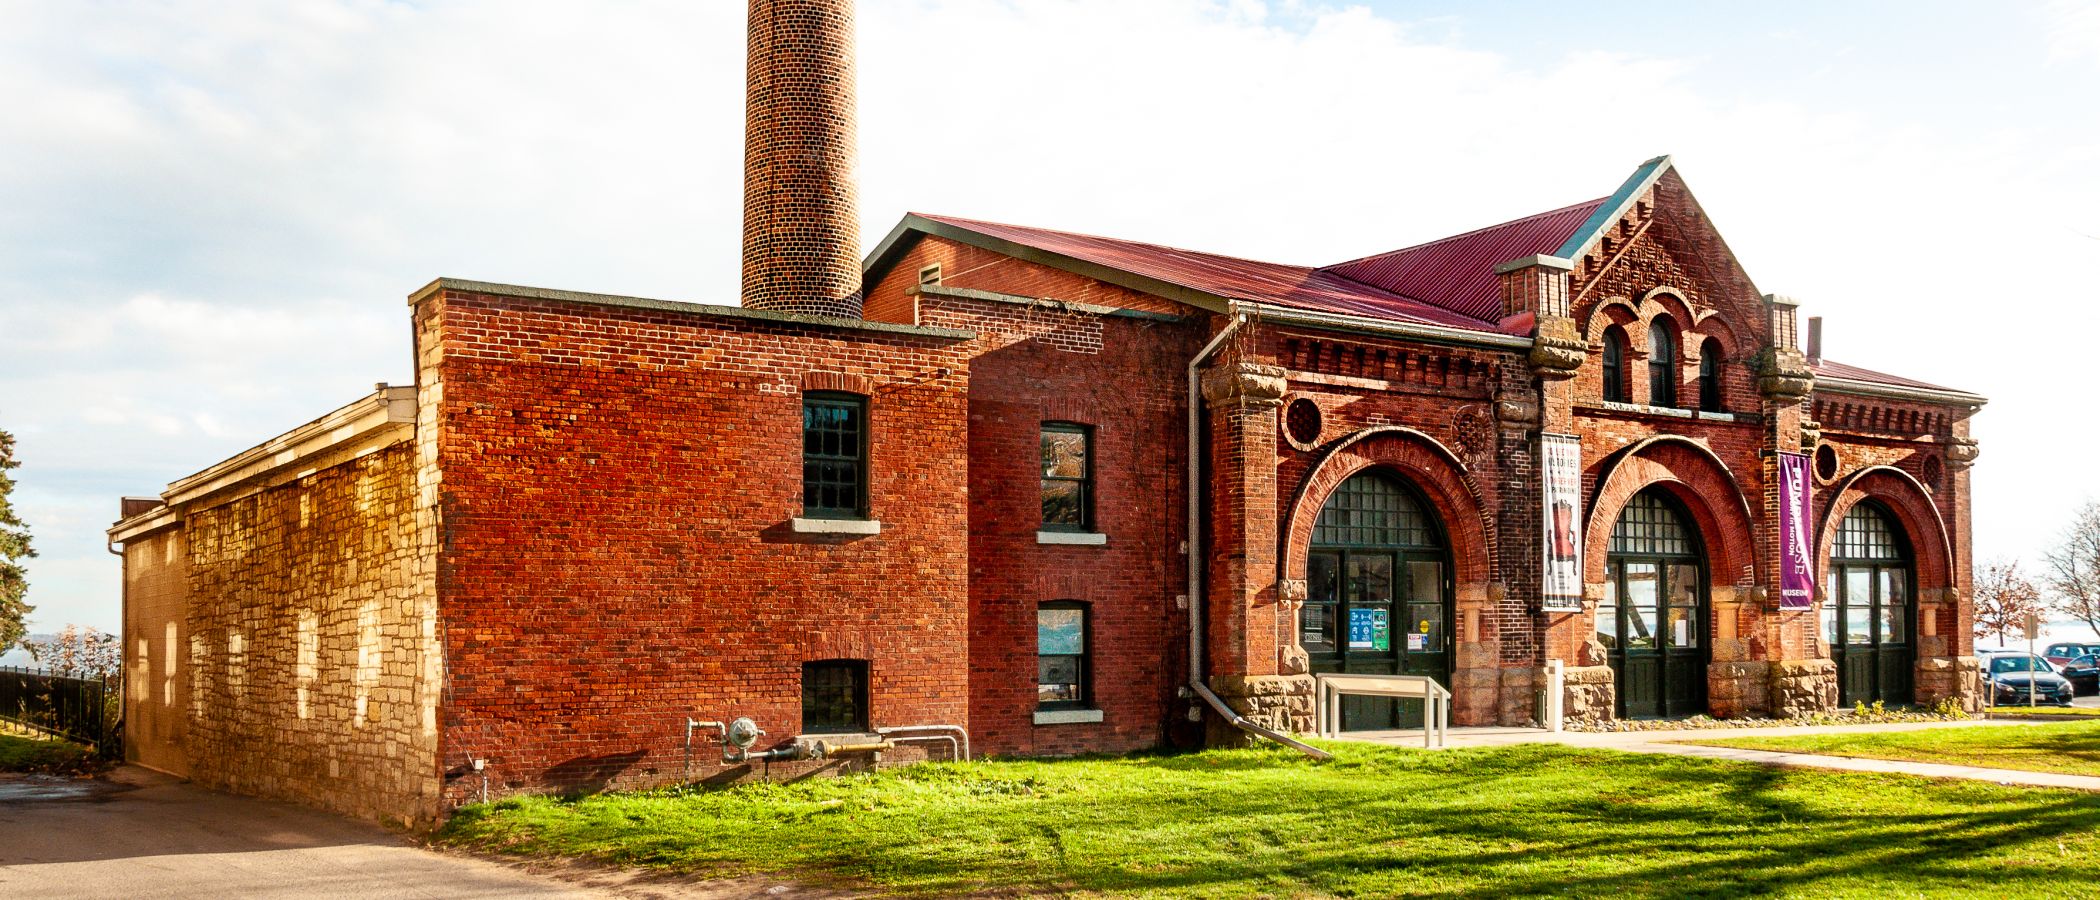 Image of the Kingston PumpHouse Steam Museum